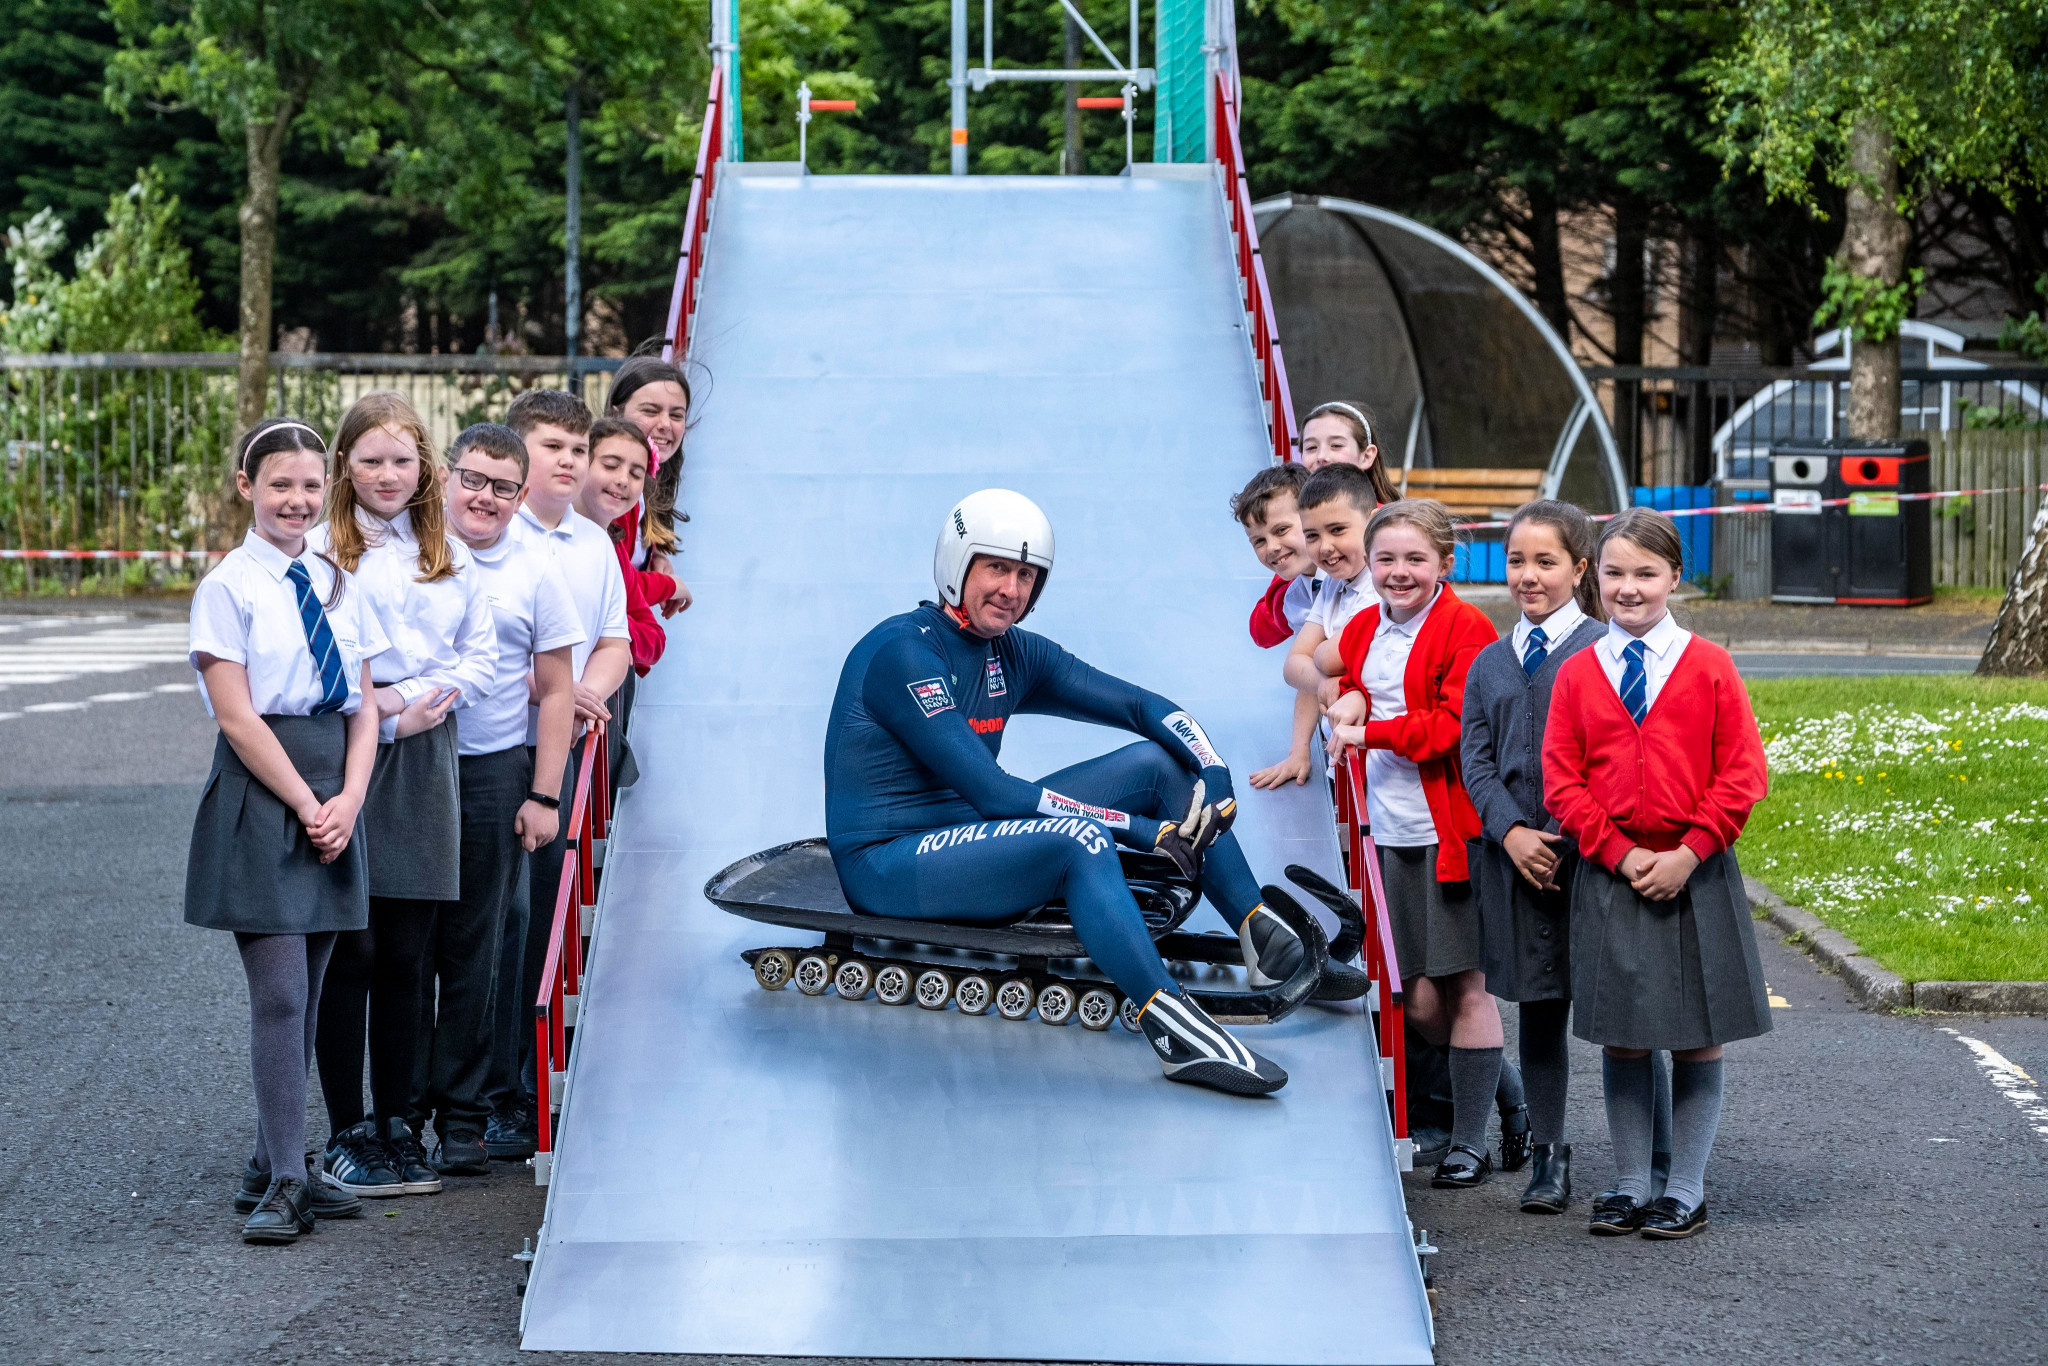 British Royal Navy receives country's first luge training ramp